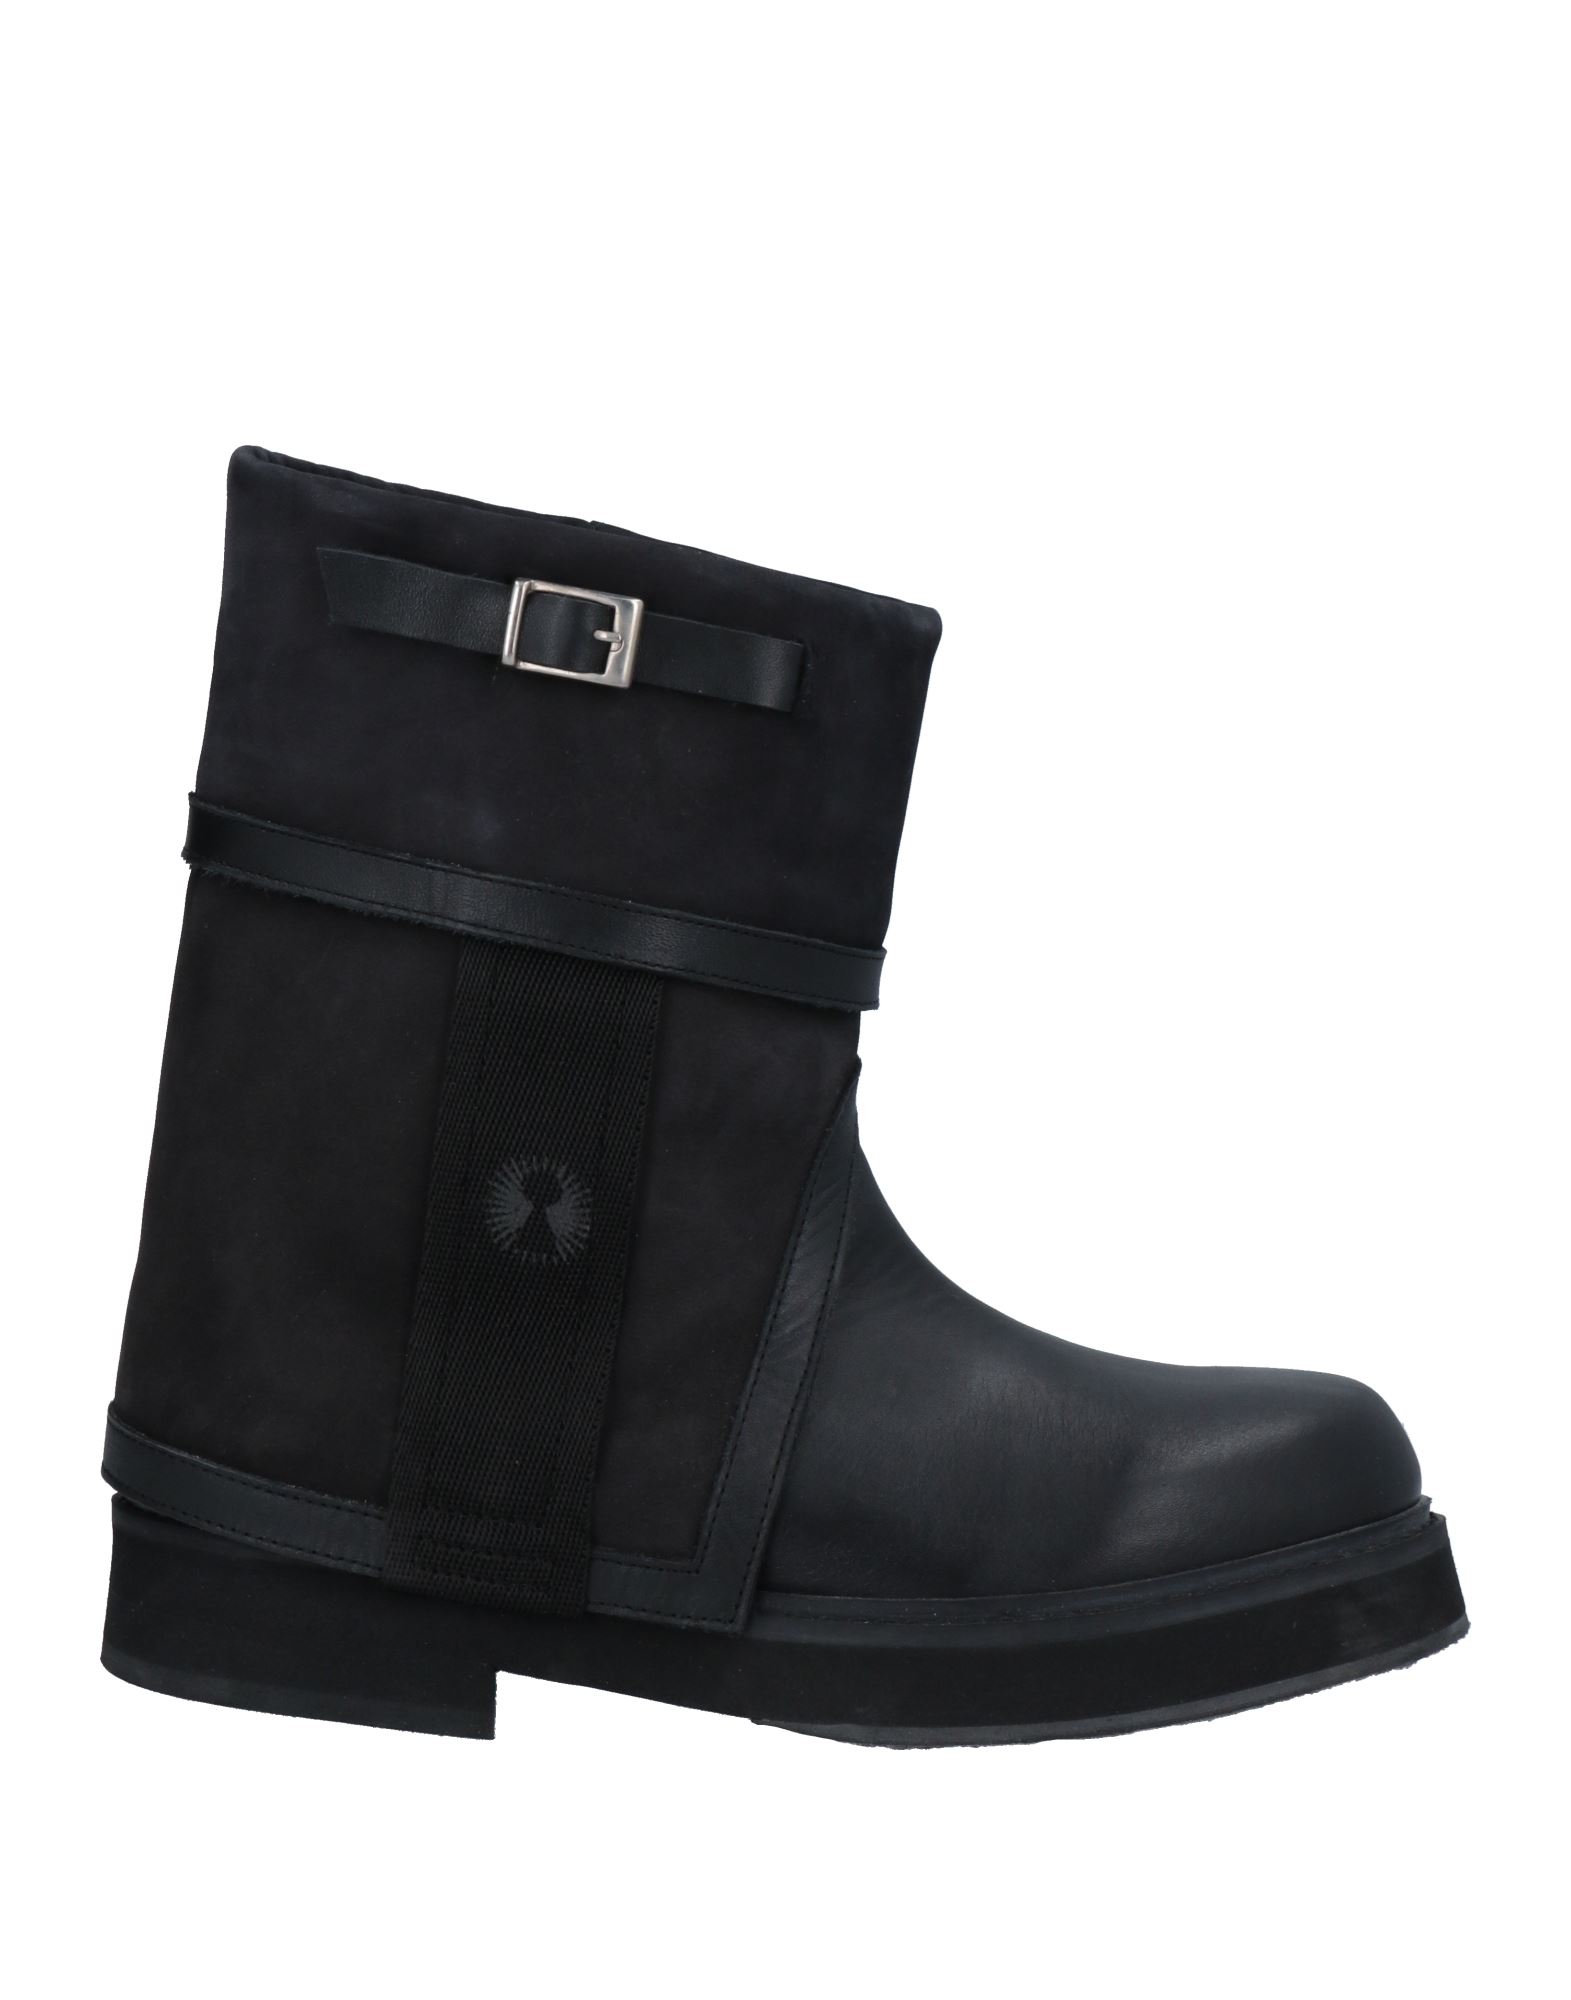 Bruno Bordese Ankle Boots In Black